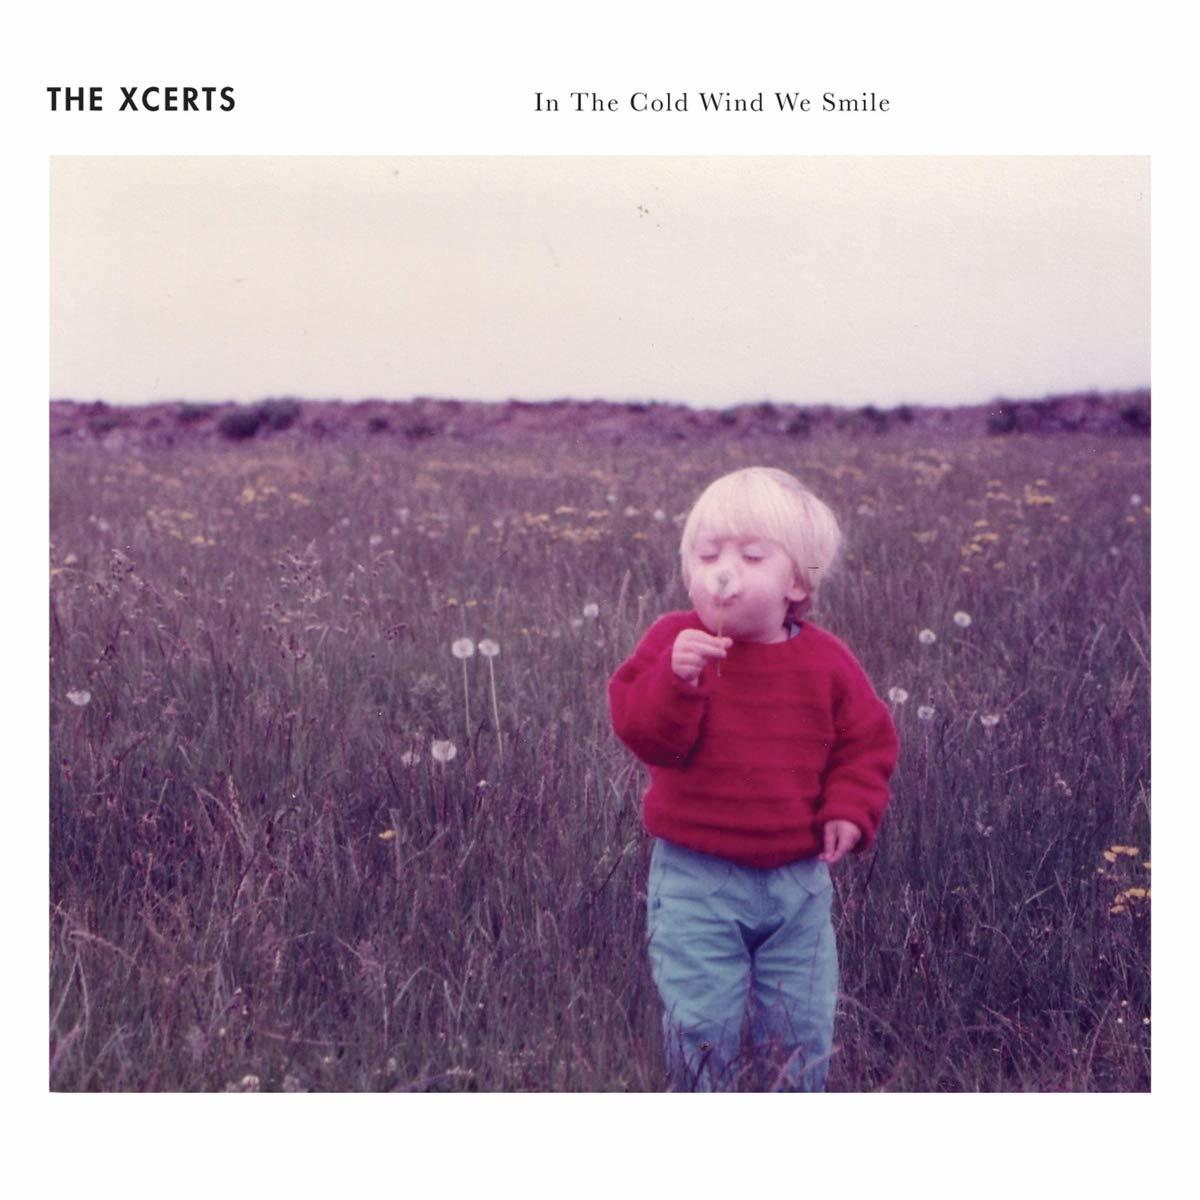 The Xcerts - In The - We (CD) Smile Cold Wind